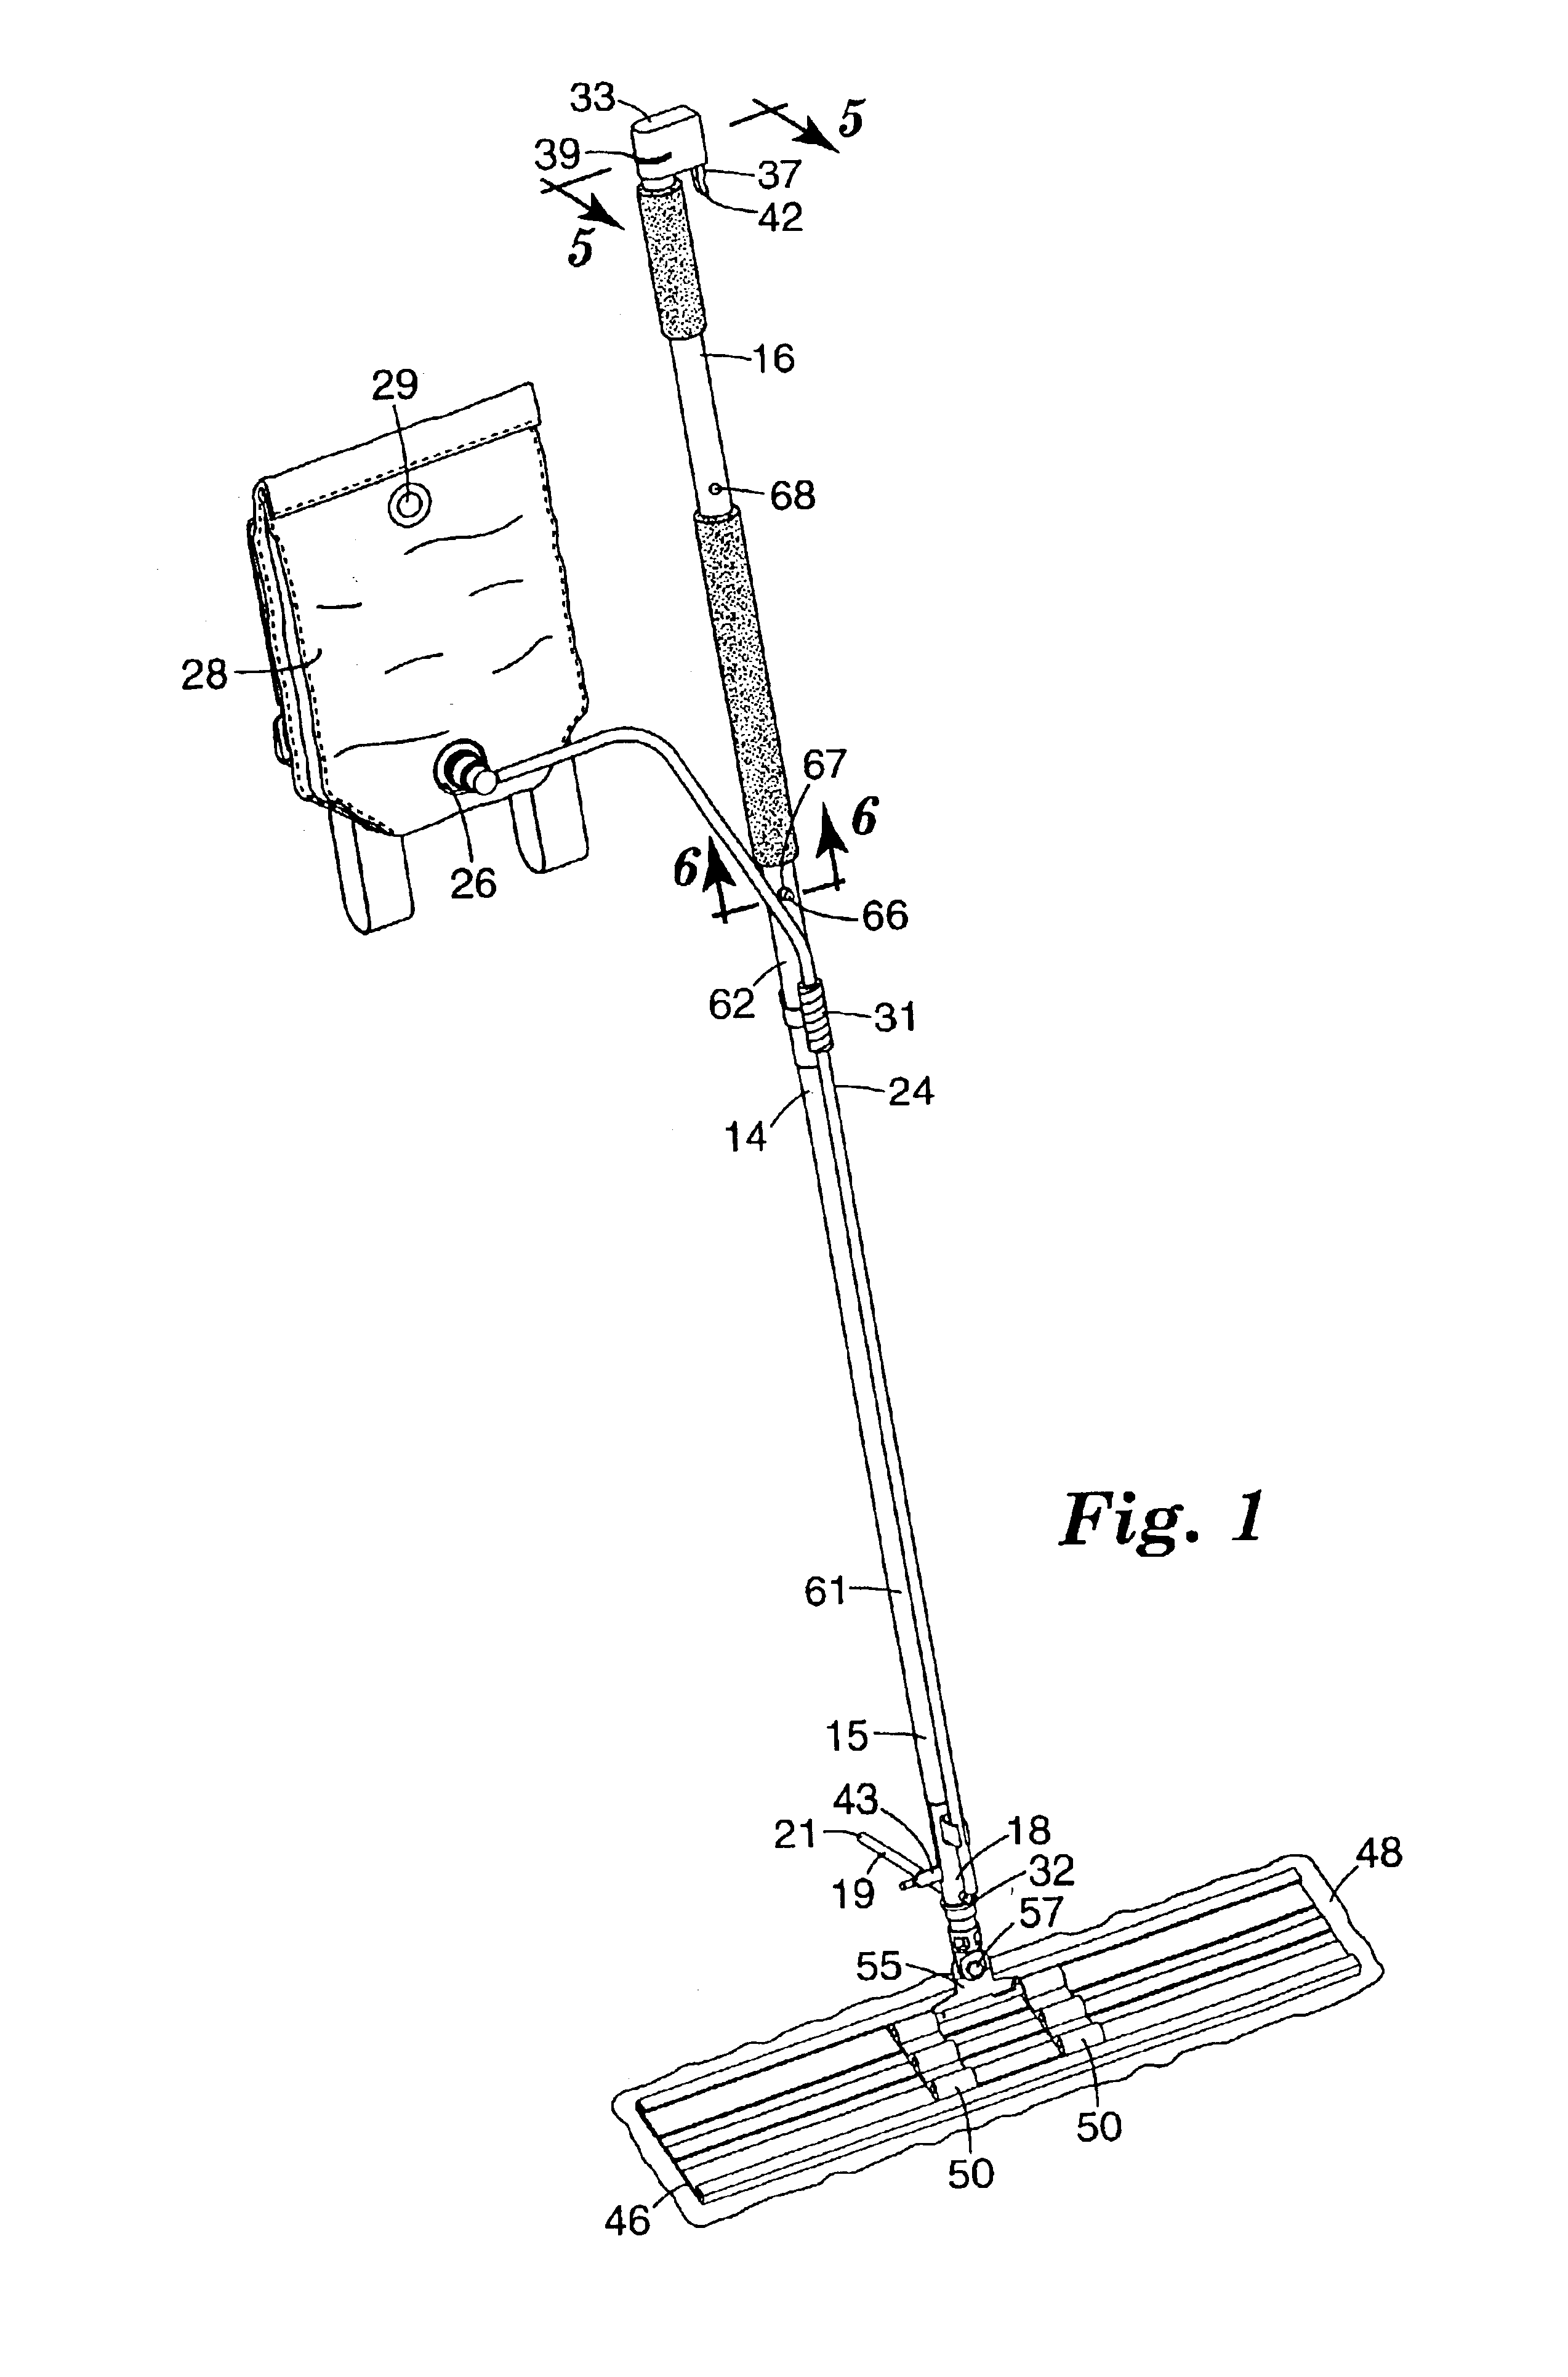 Mop assembly and cart